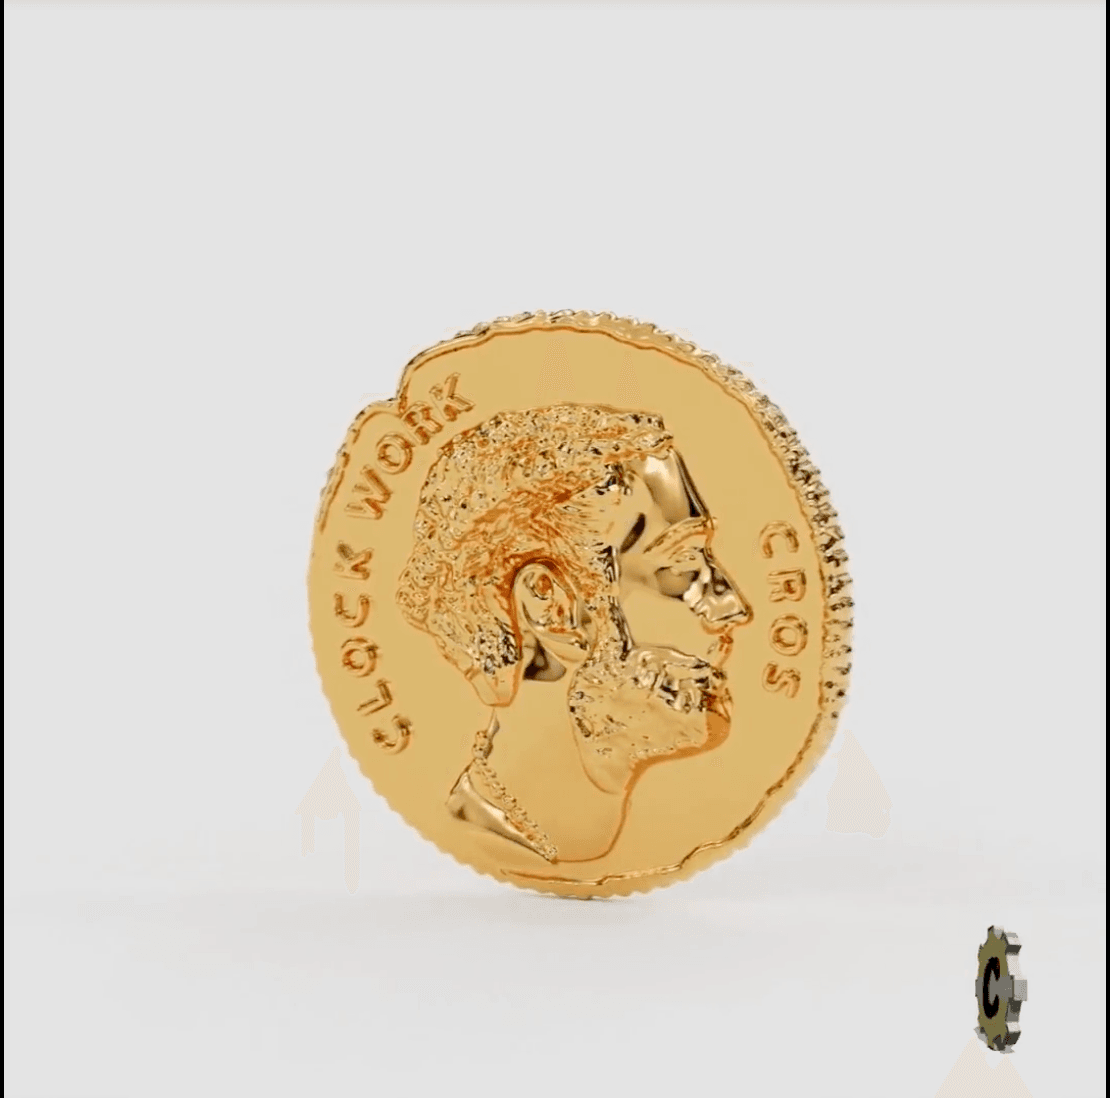 “The Horologist" 2021 AD; Roman inspired Coin